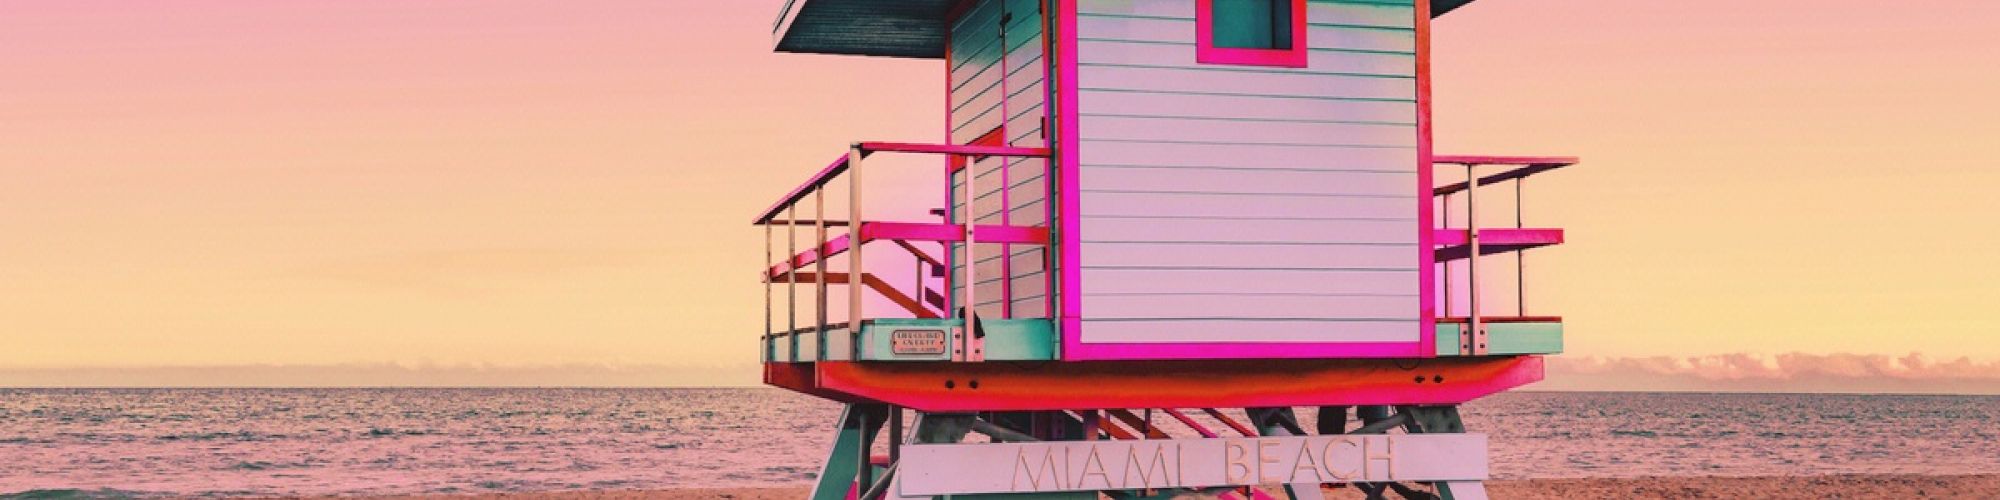 A brightly colored lifeguard tower on a sandy beach with a pink and yellow sky in the background.